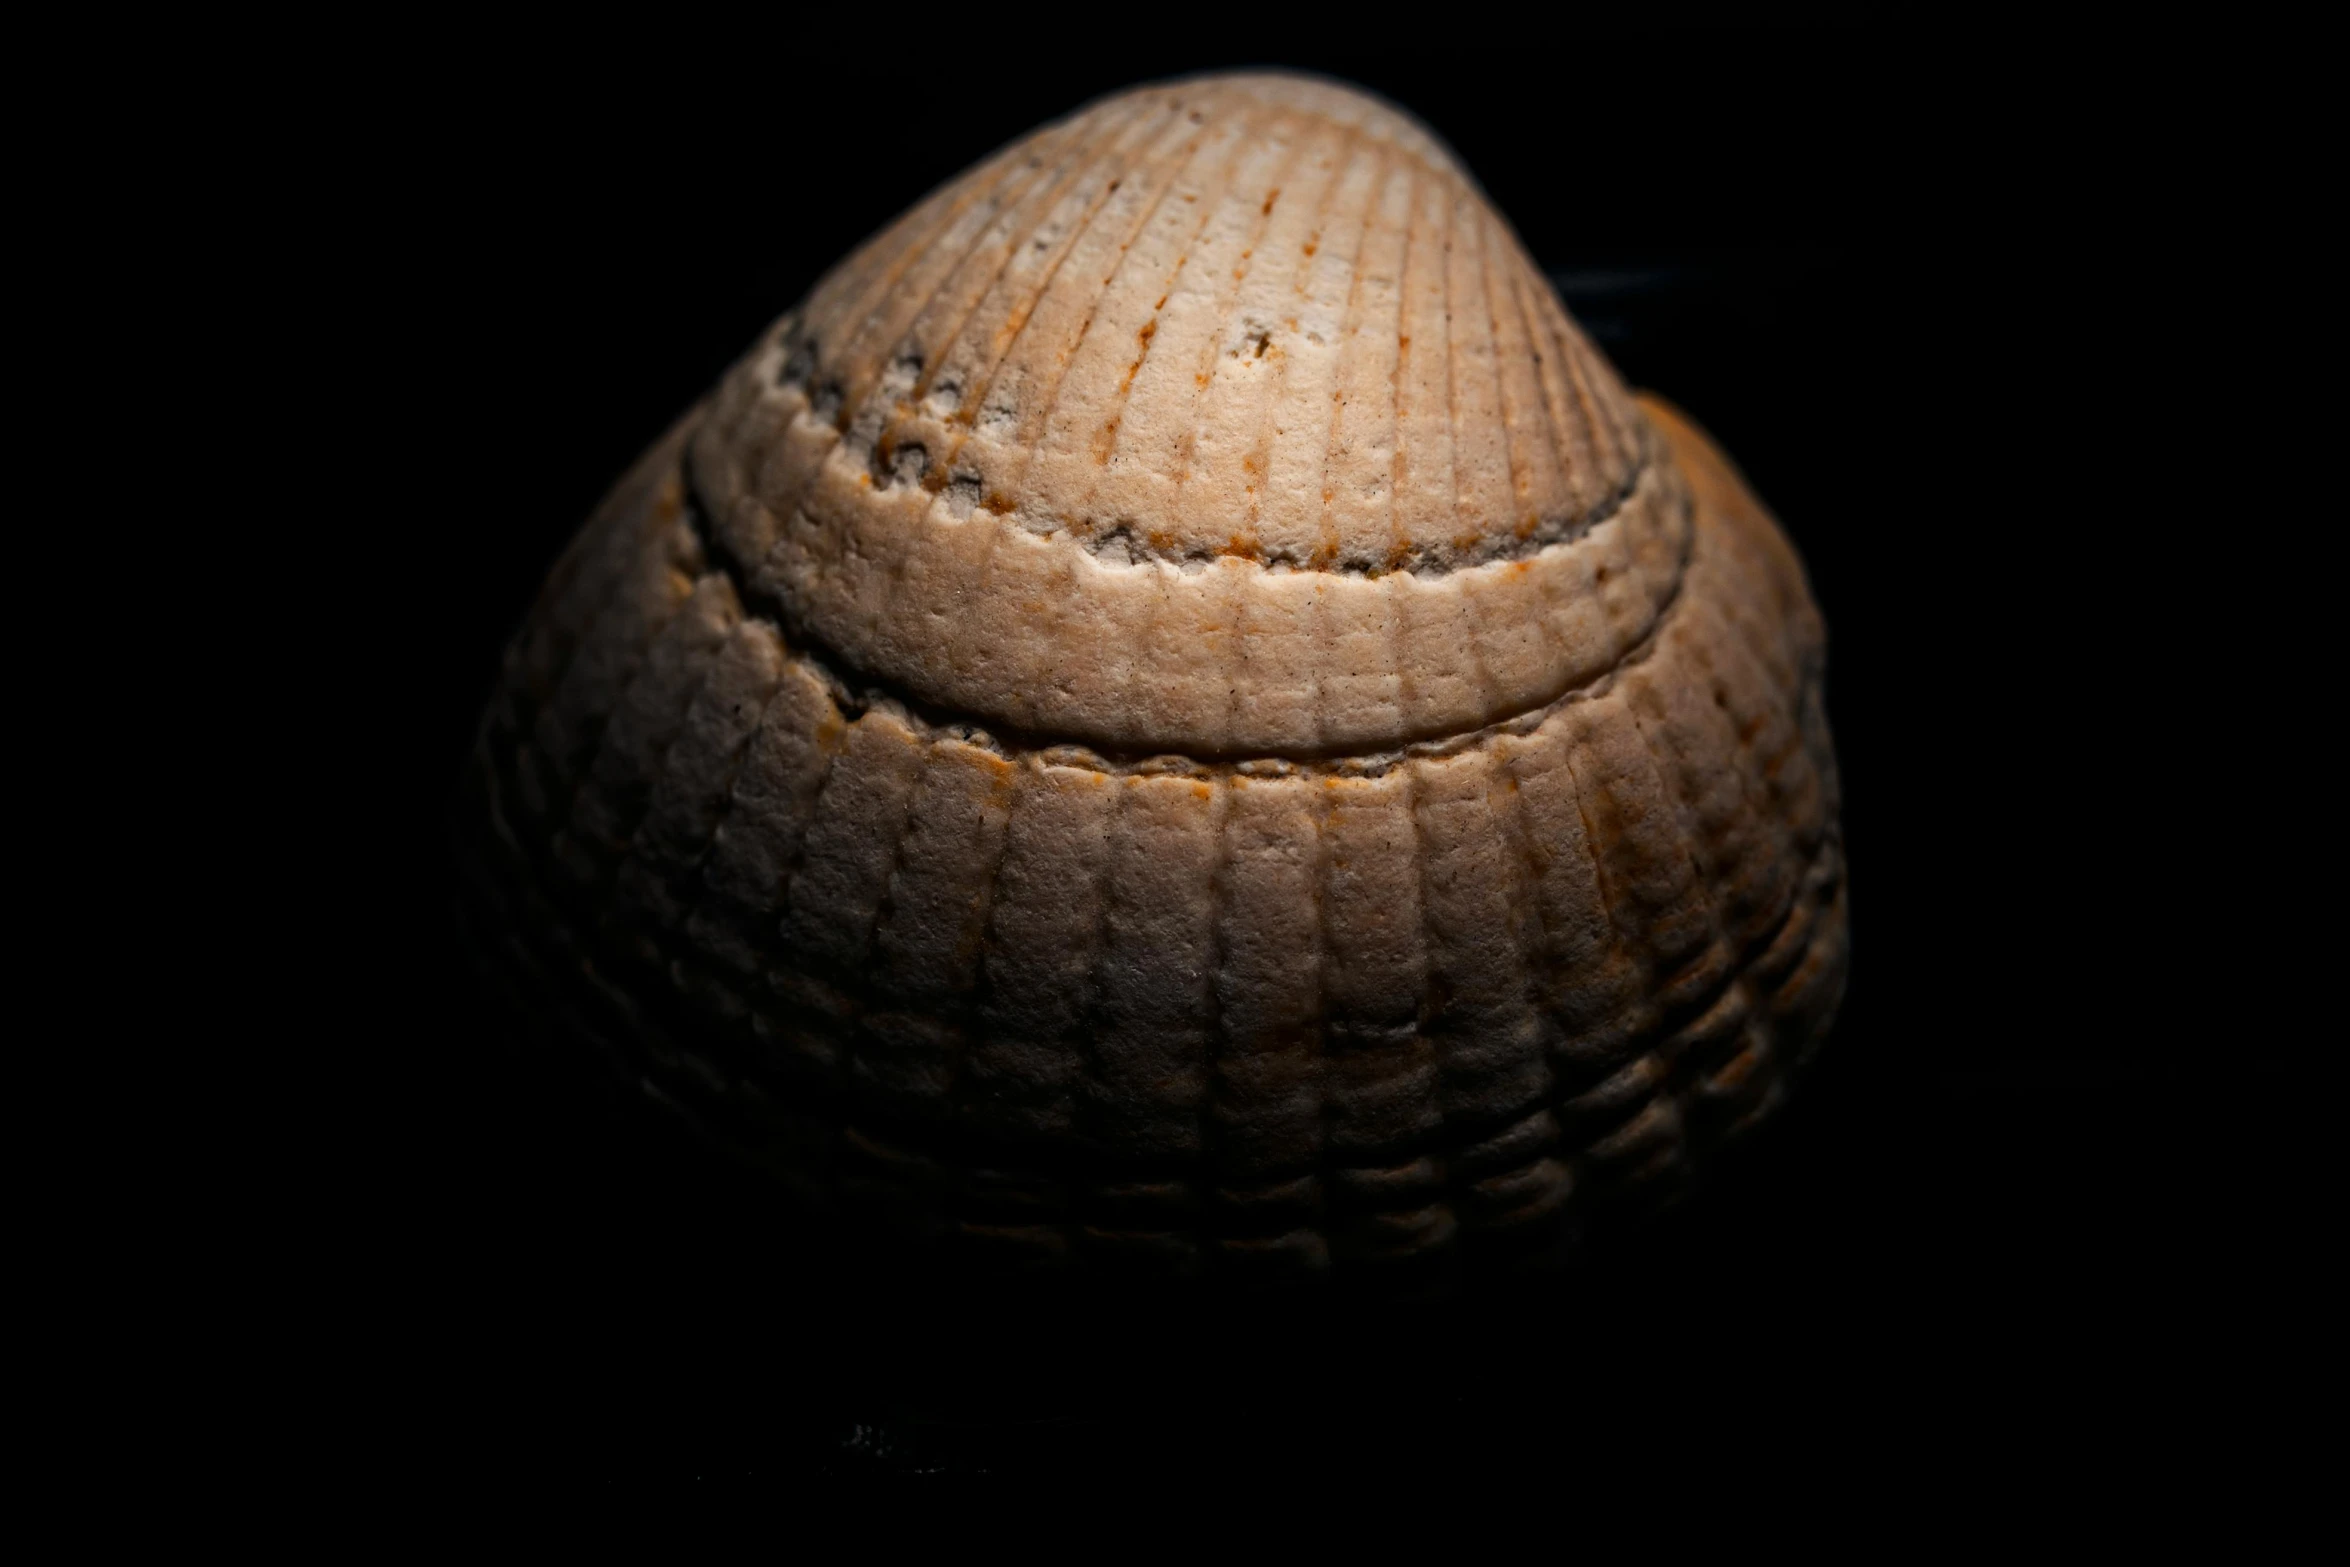 the side of an animal's shell on a dark background